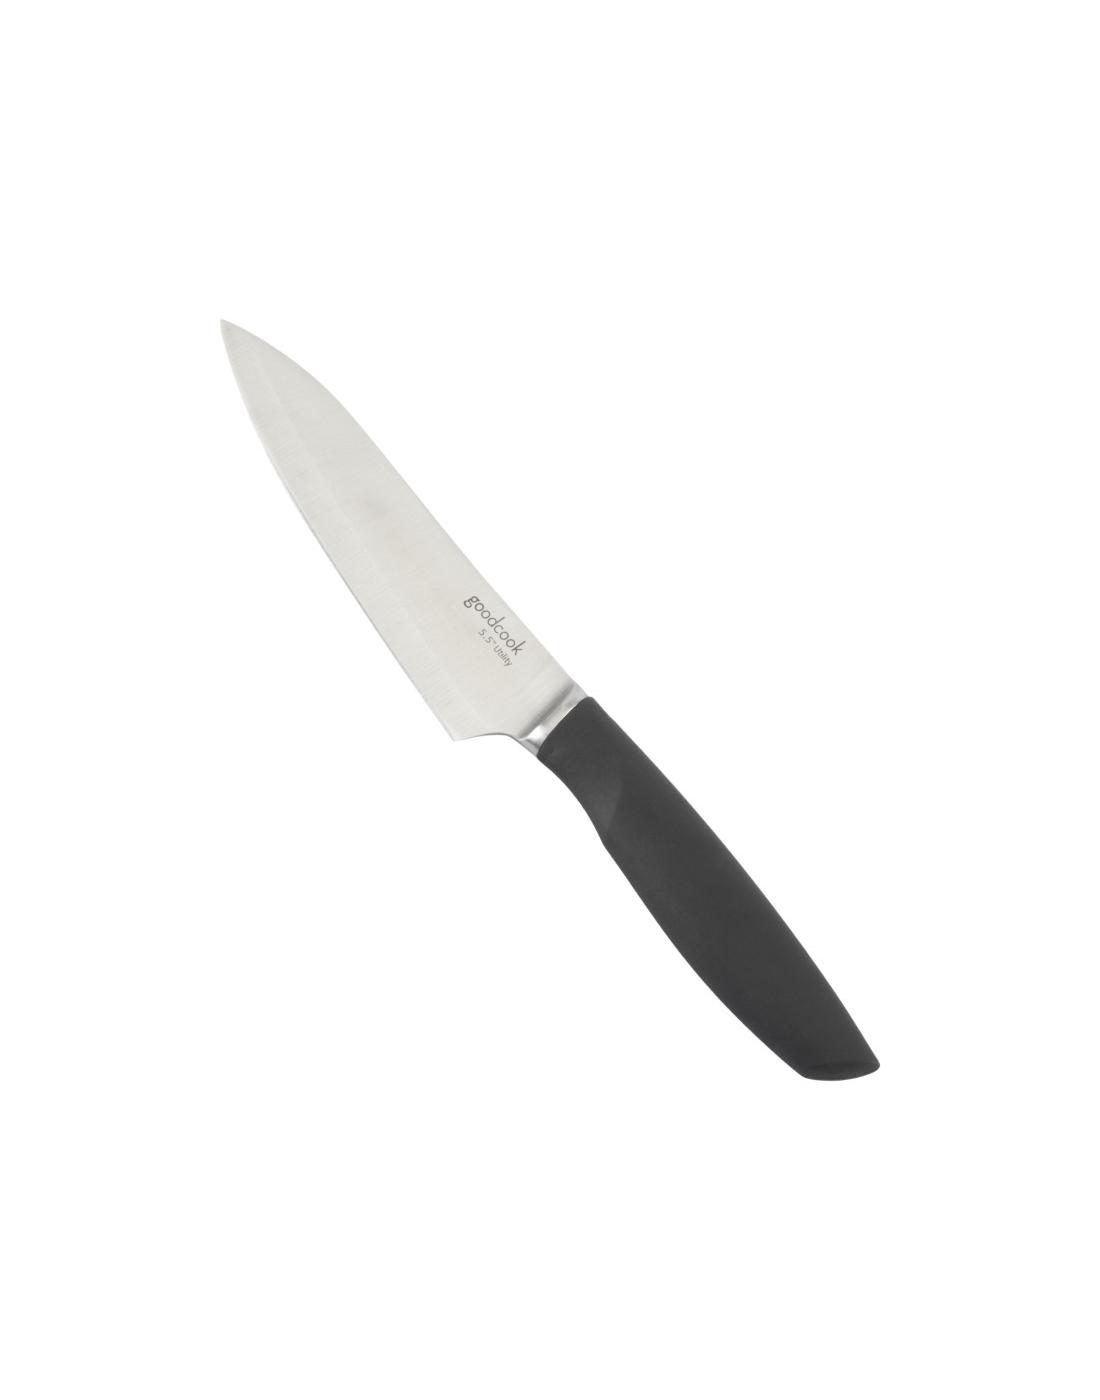 GoodCook Touch Utility Knife; image 3 of 3